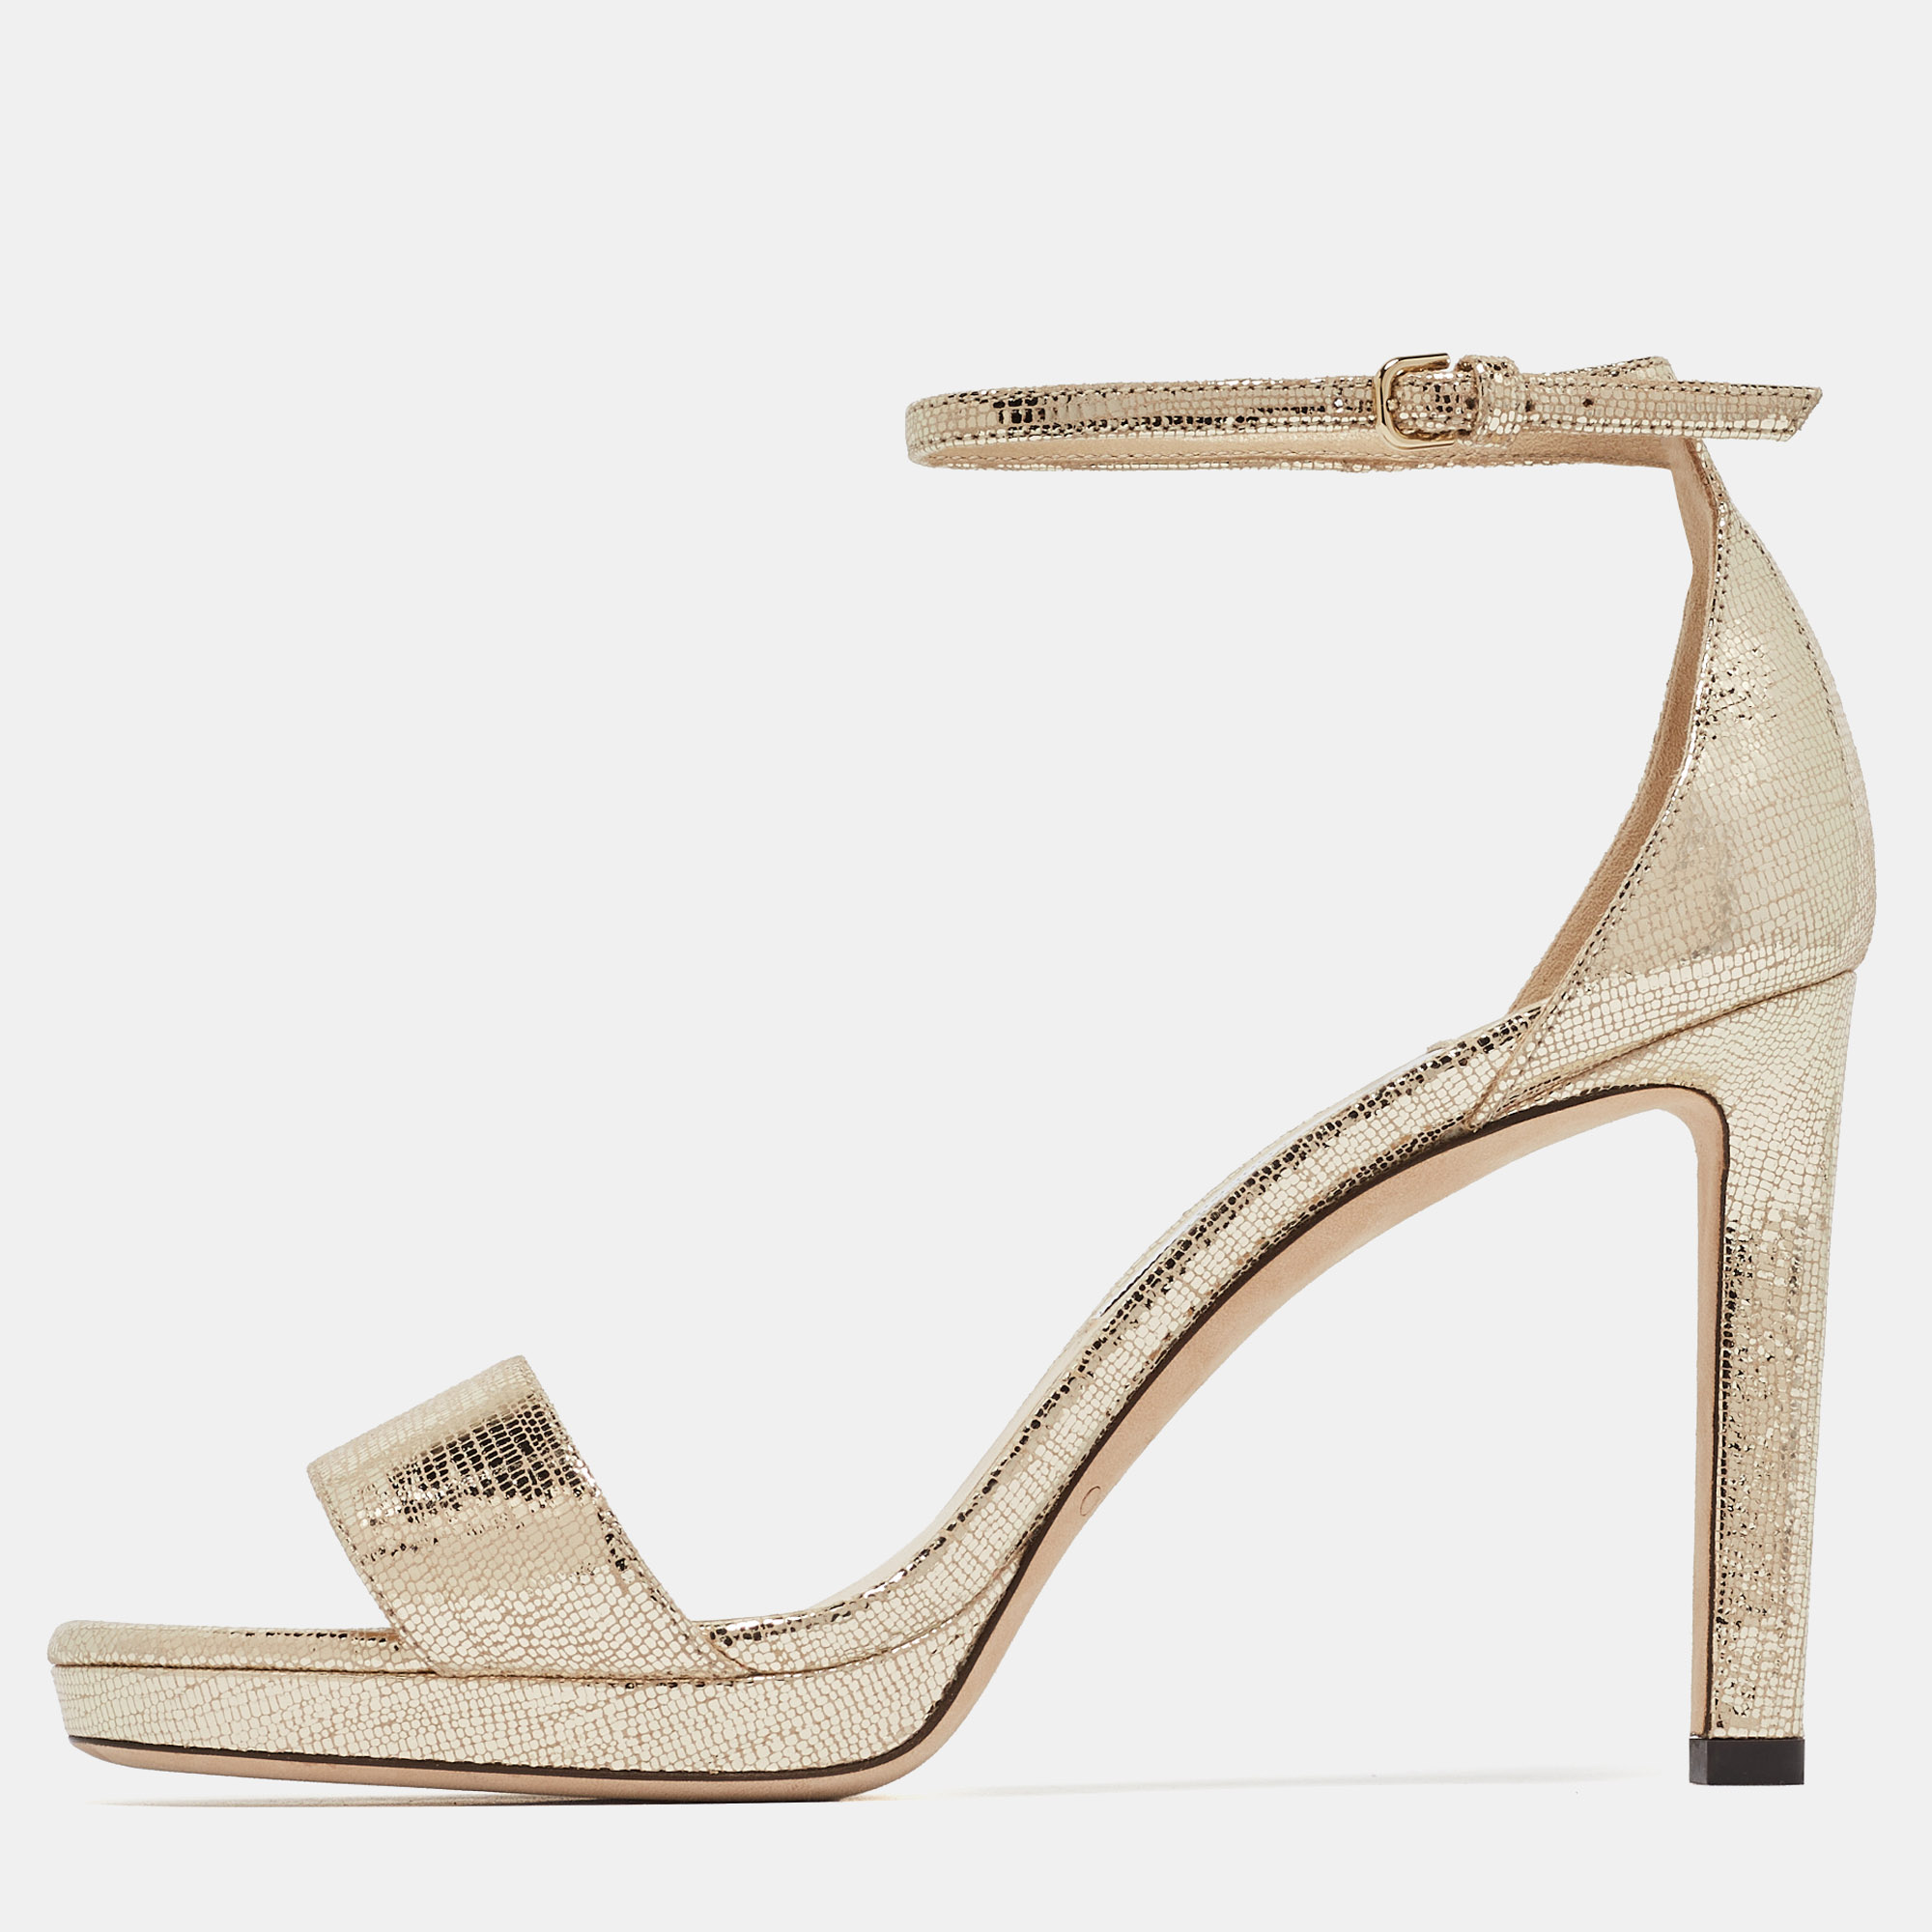 Jimmy choo gold texture leather  ankle strap sandals size 38.5